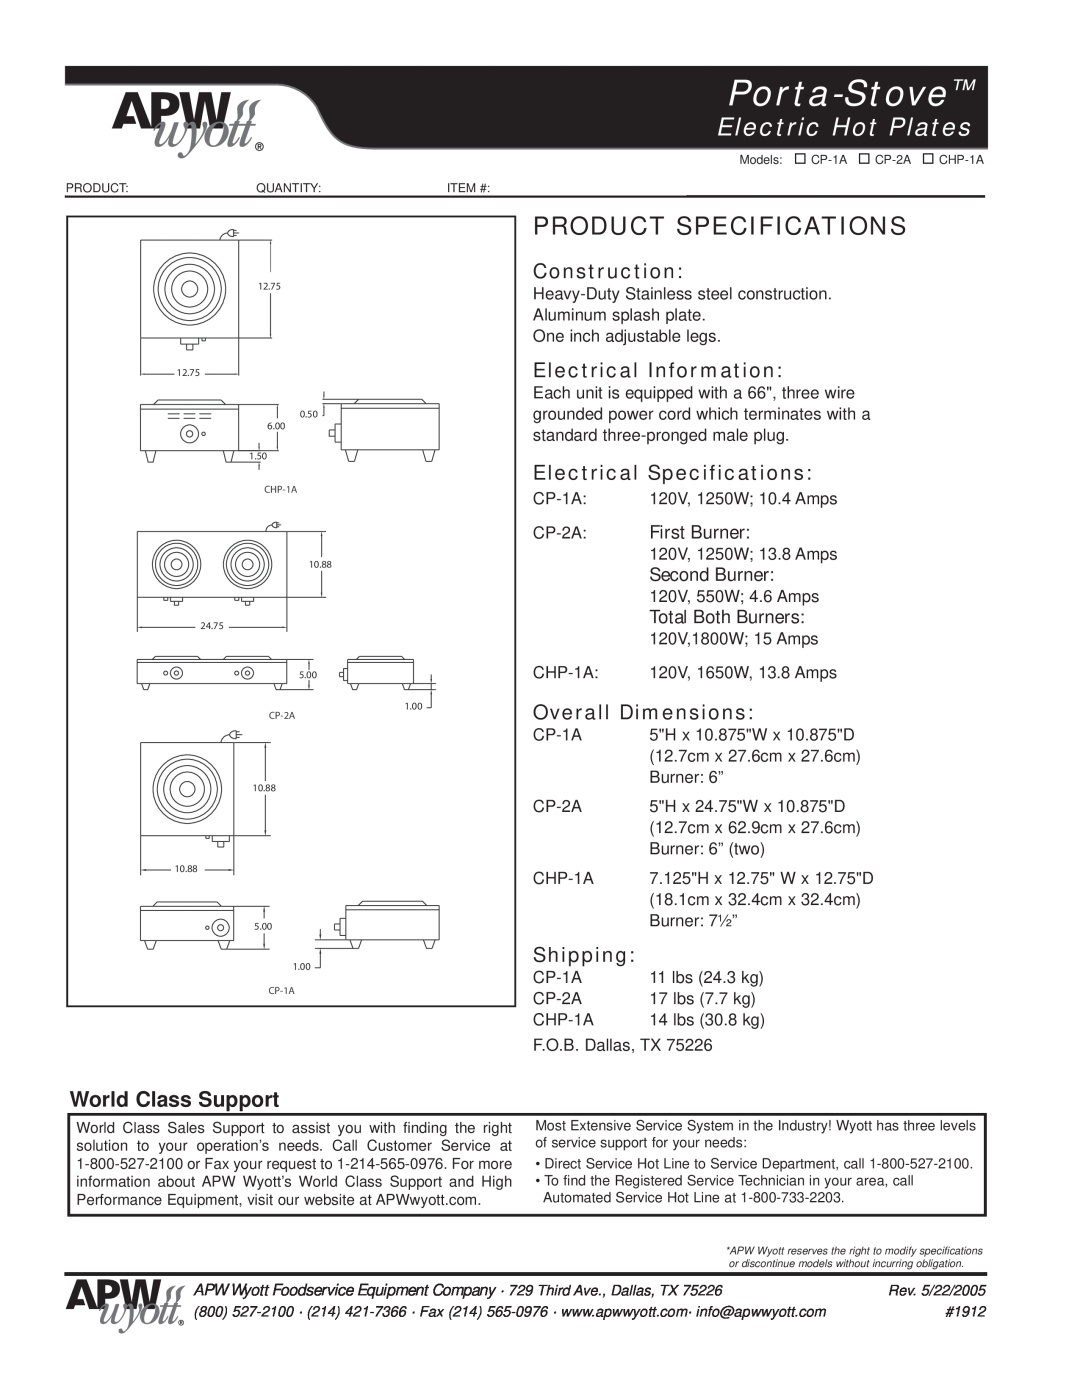 APW Wyott CP-2A Product Specifications, Construction, Electrical Information, Electrical Specifications, First Burner 